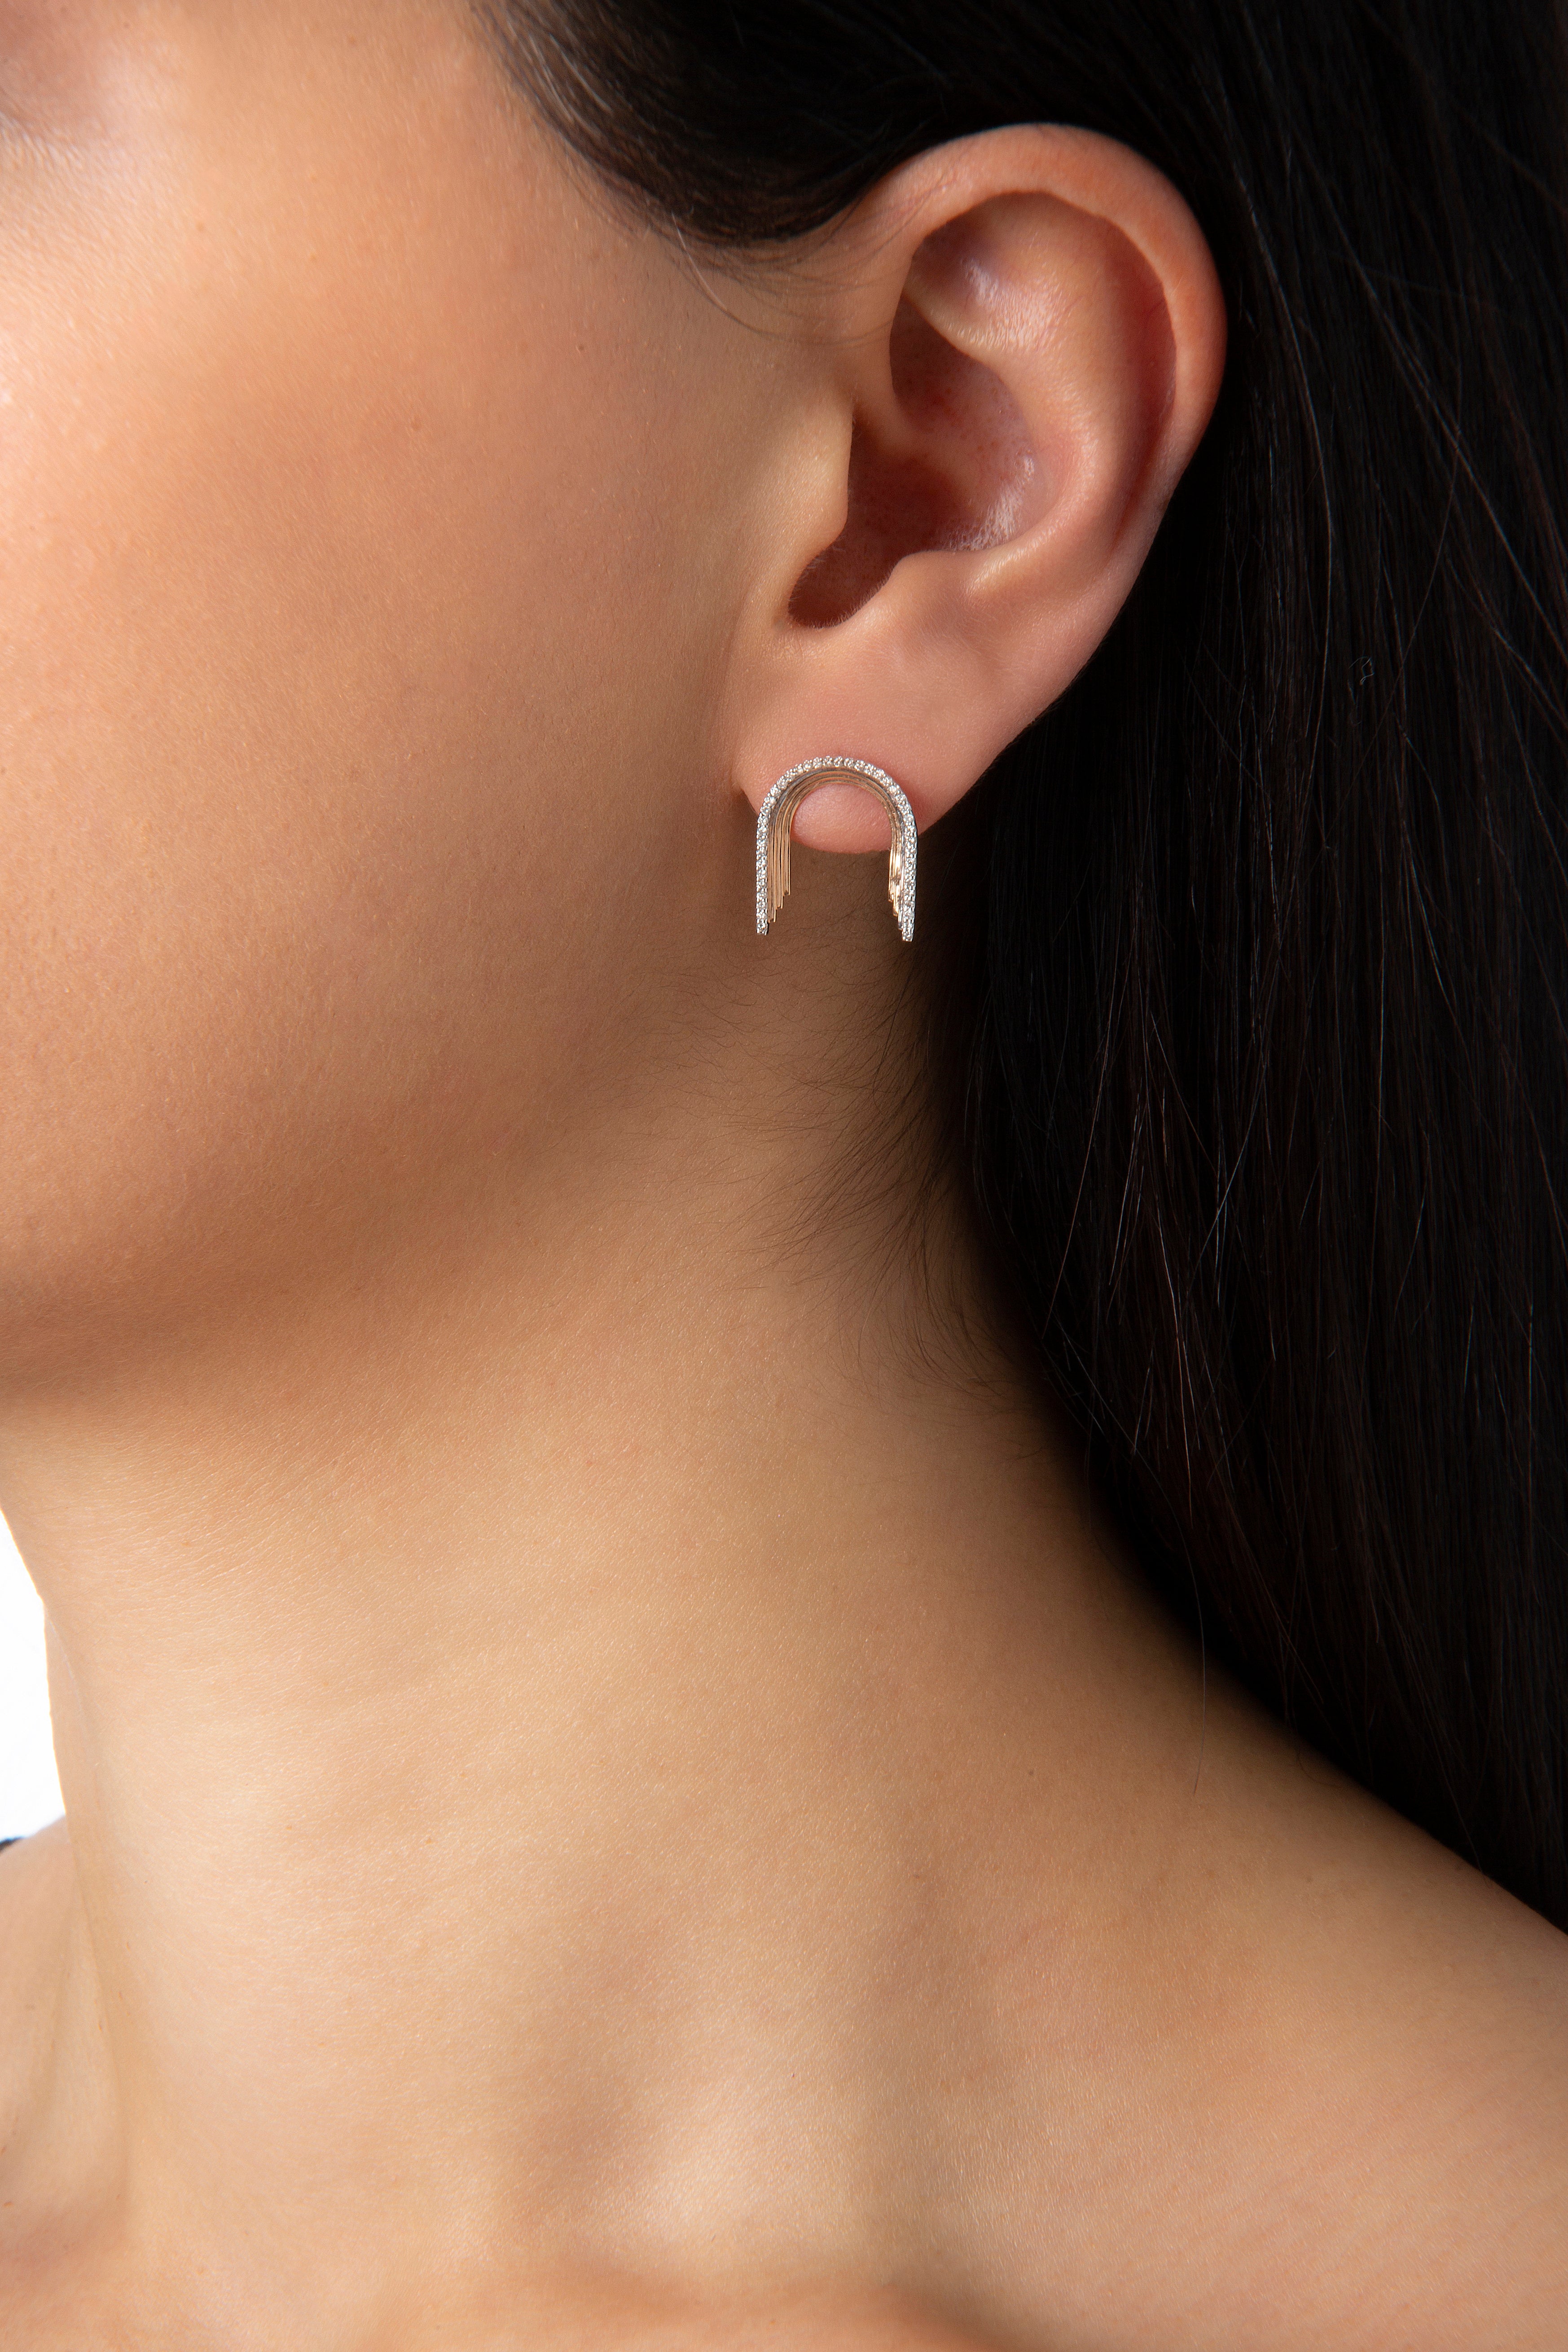 Convex Arch Earring in Rose Gold - Her Story Shop